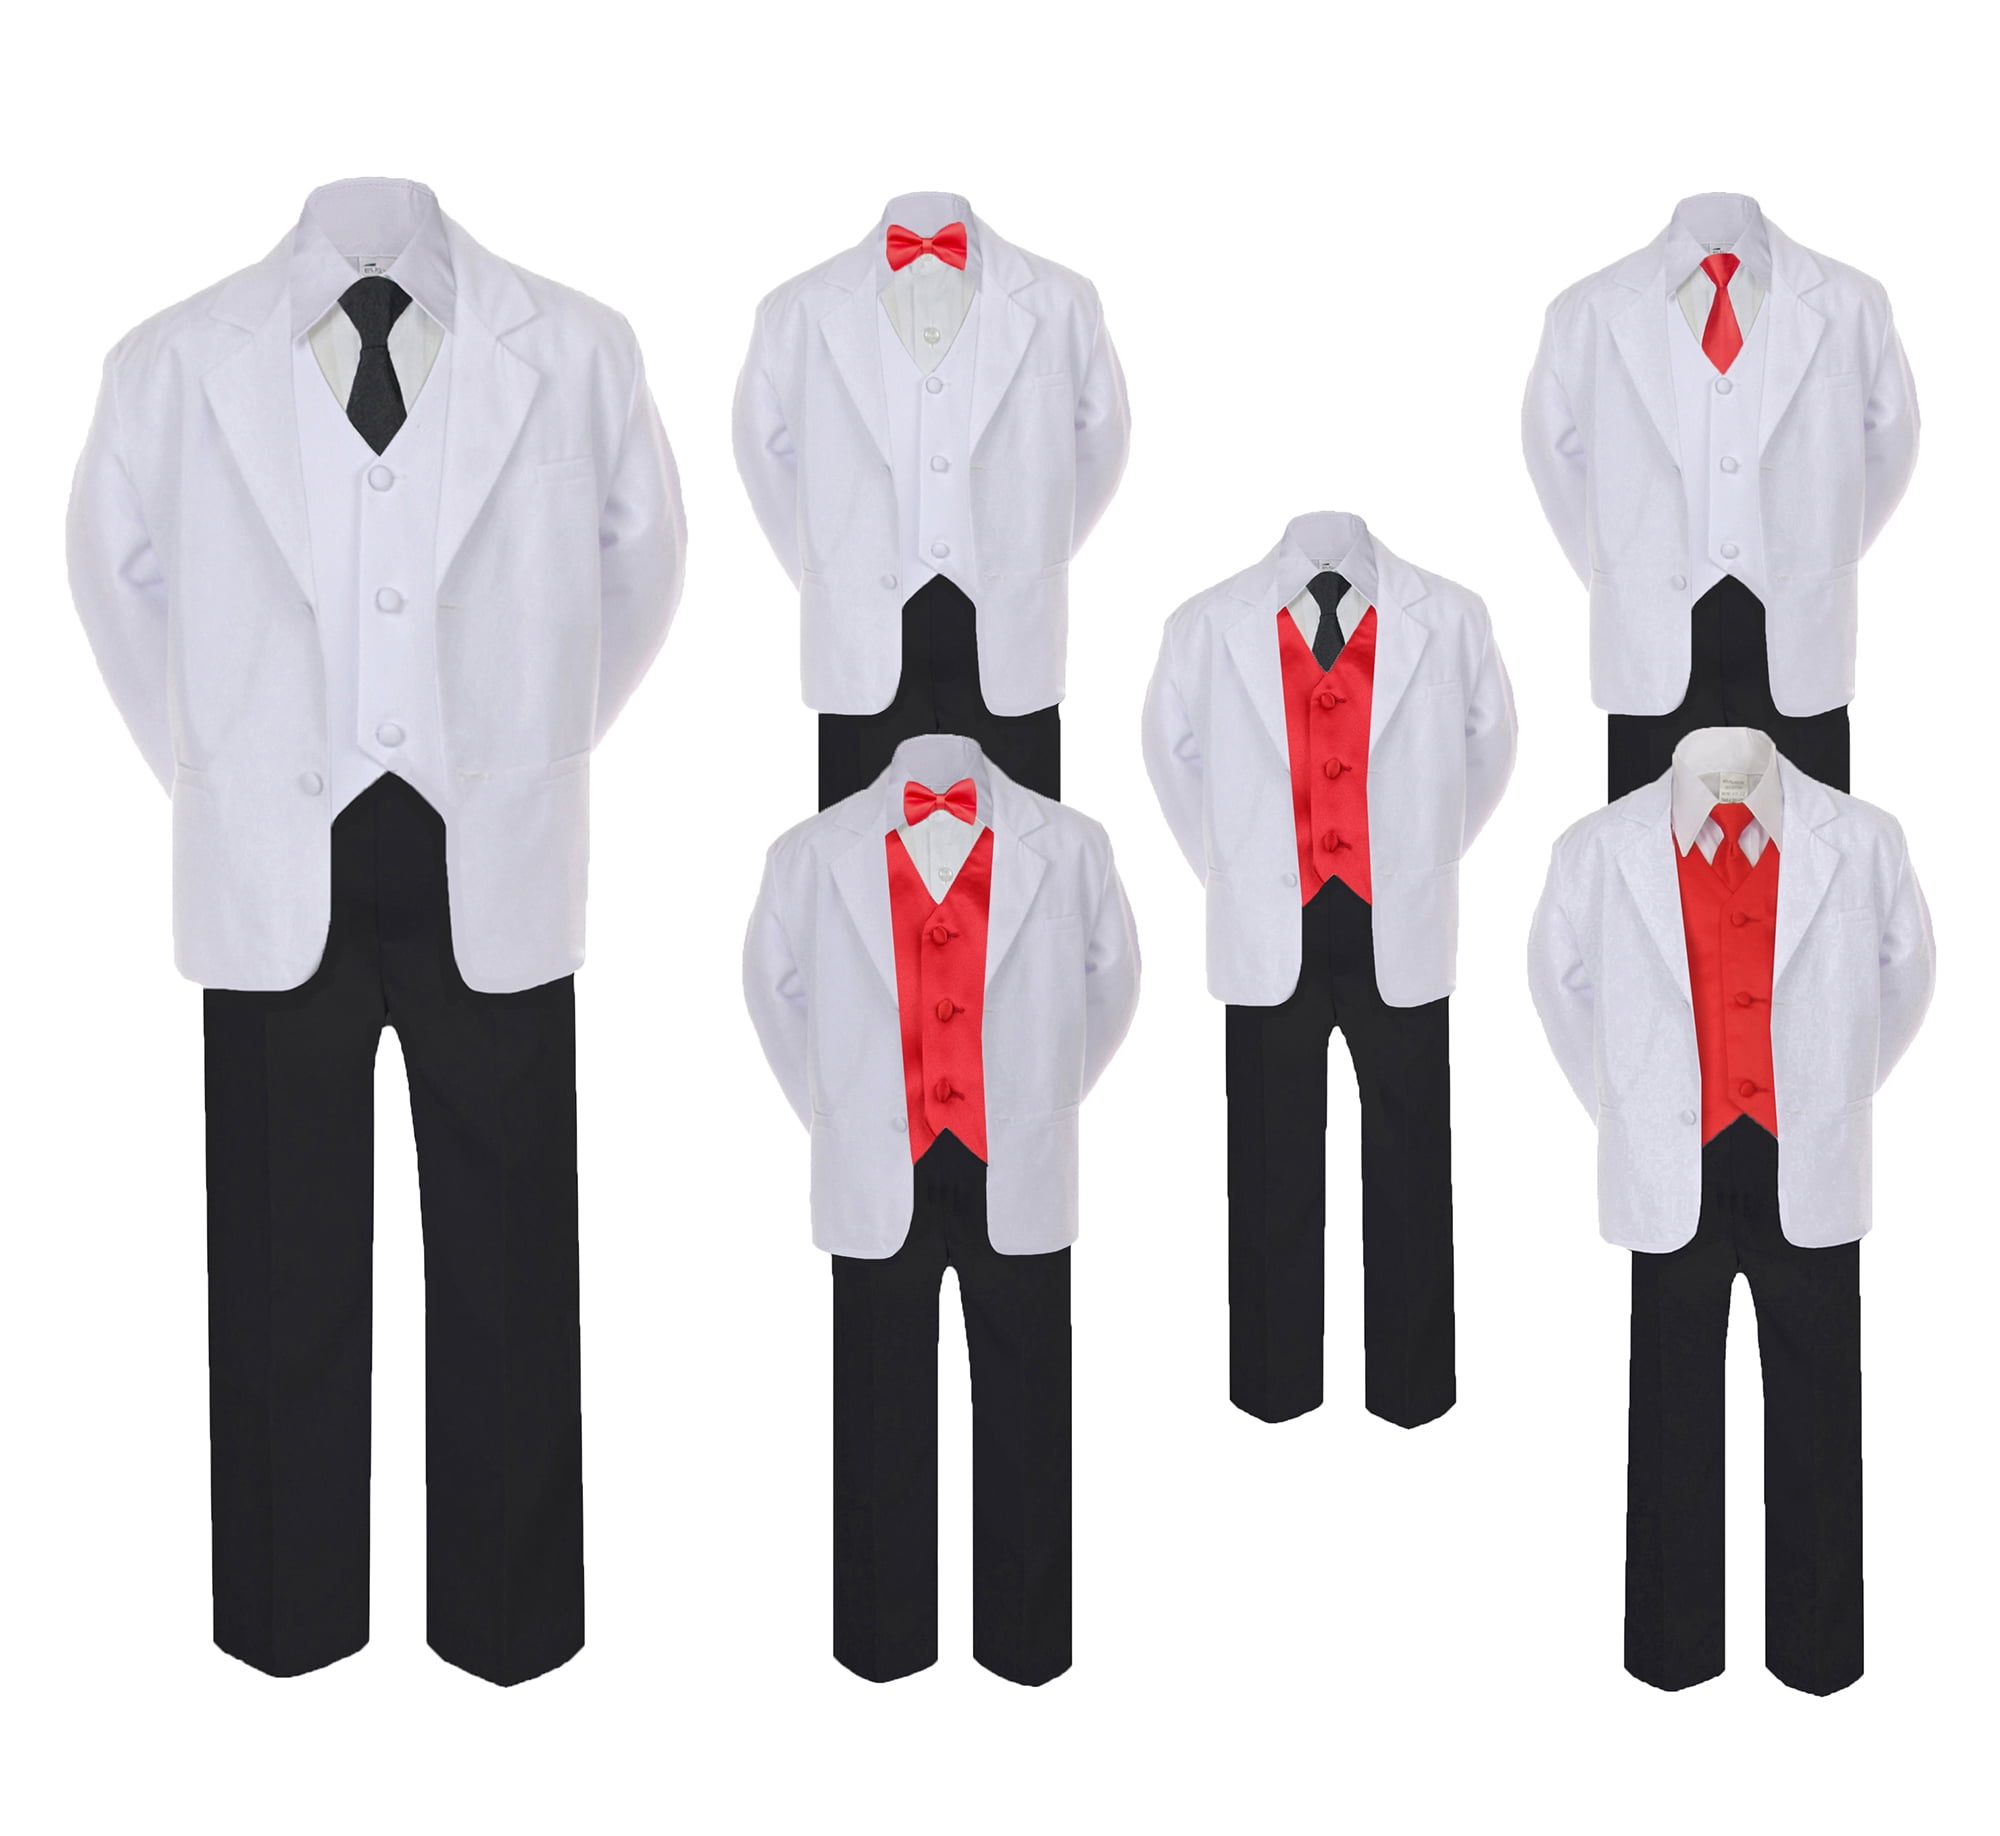 New Baby Boy Formal Wedding Party 7pc Black Suit Tuxedo Red Vest Bow Tie S-4T 